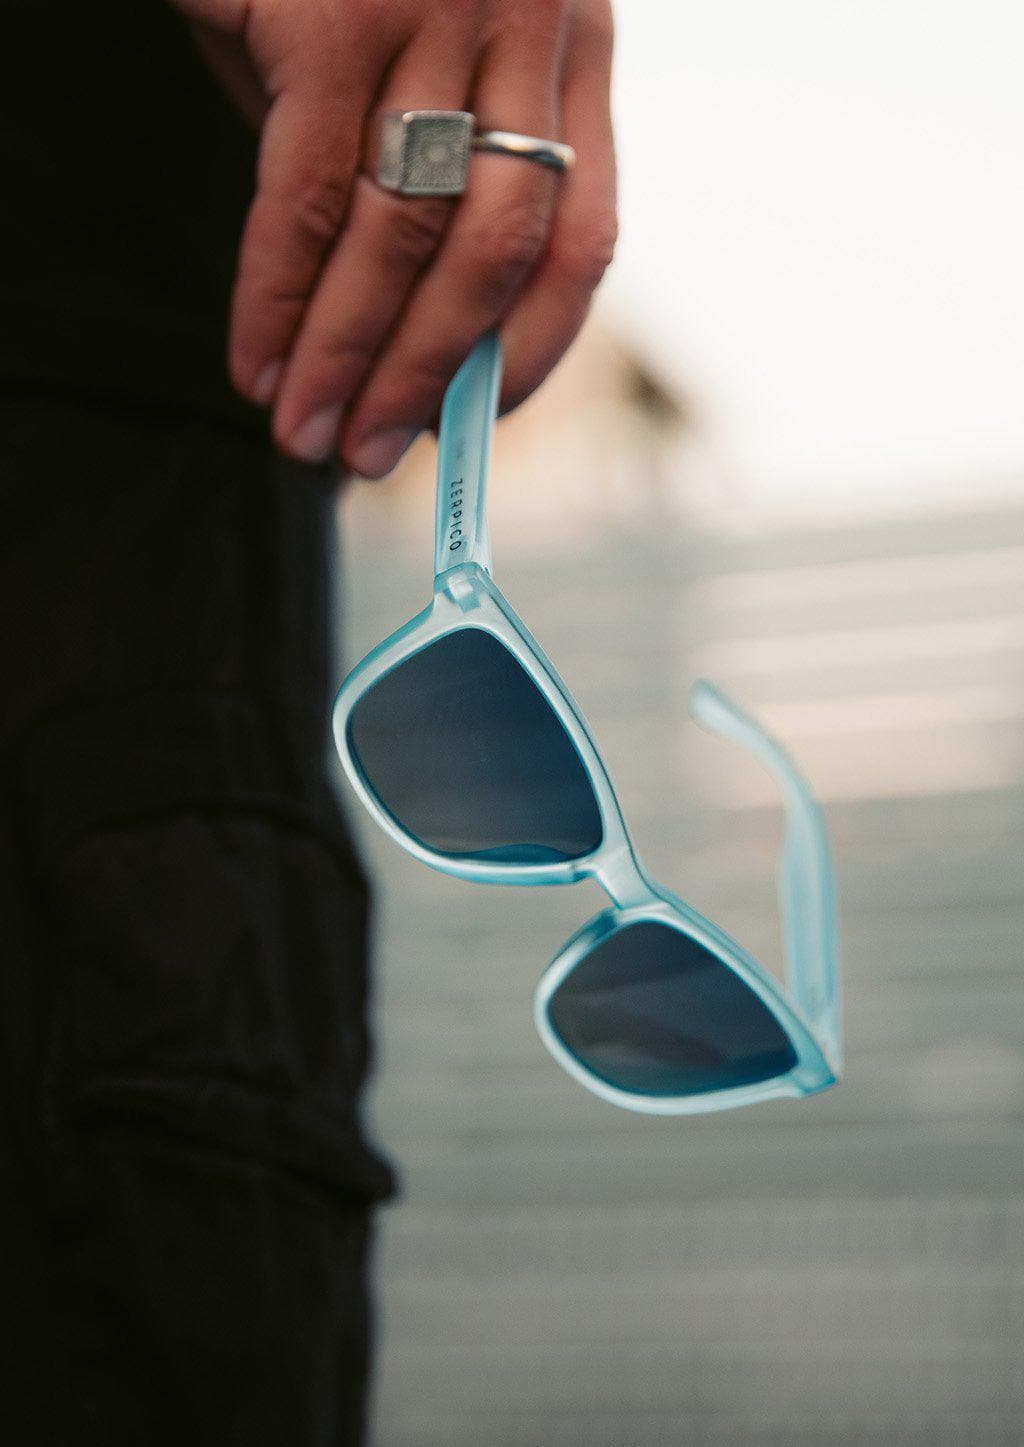 Our Mood V2 is an improved version of our last wayfarers. Plastic body for great quality and durabilty. This is Belize with blue frame and blue lenses. Close up outside.